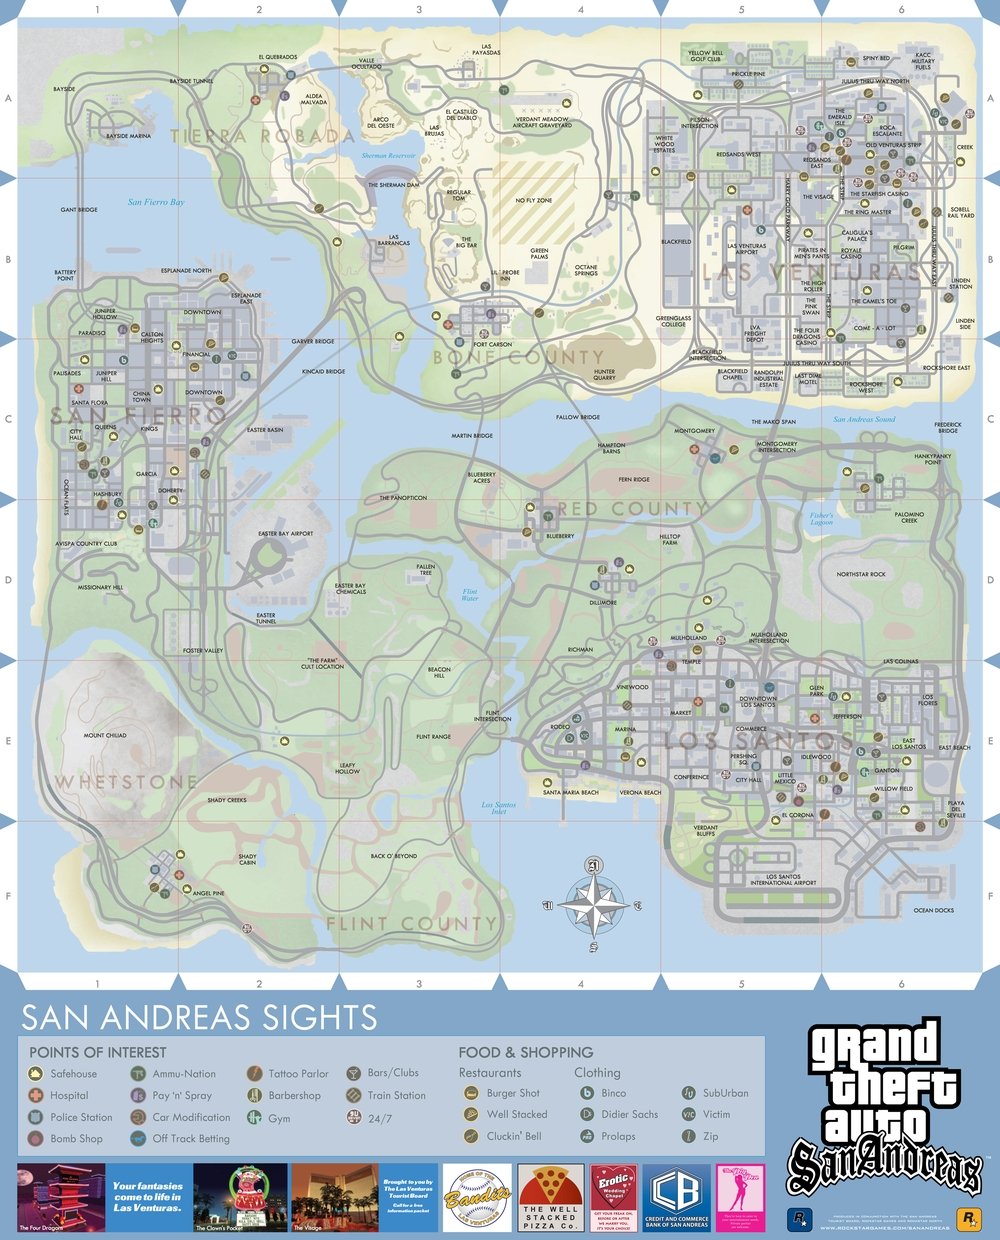 The official San Andreas Tourist Board map. (Courtesy of Rockstar Games)